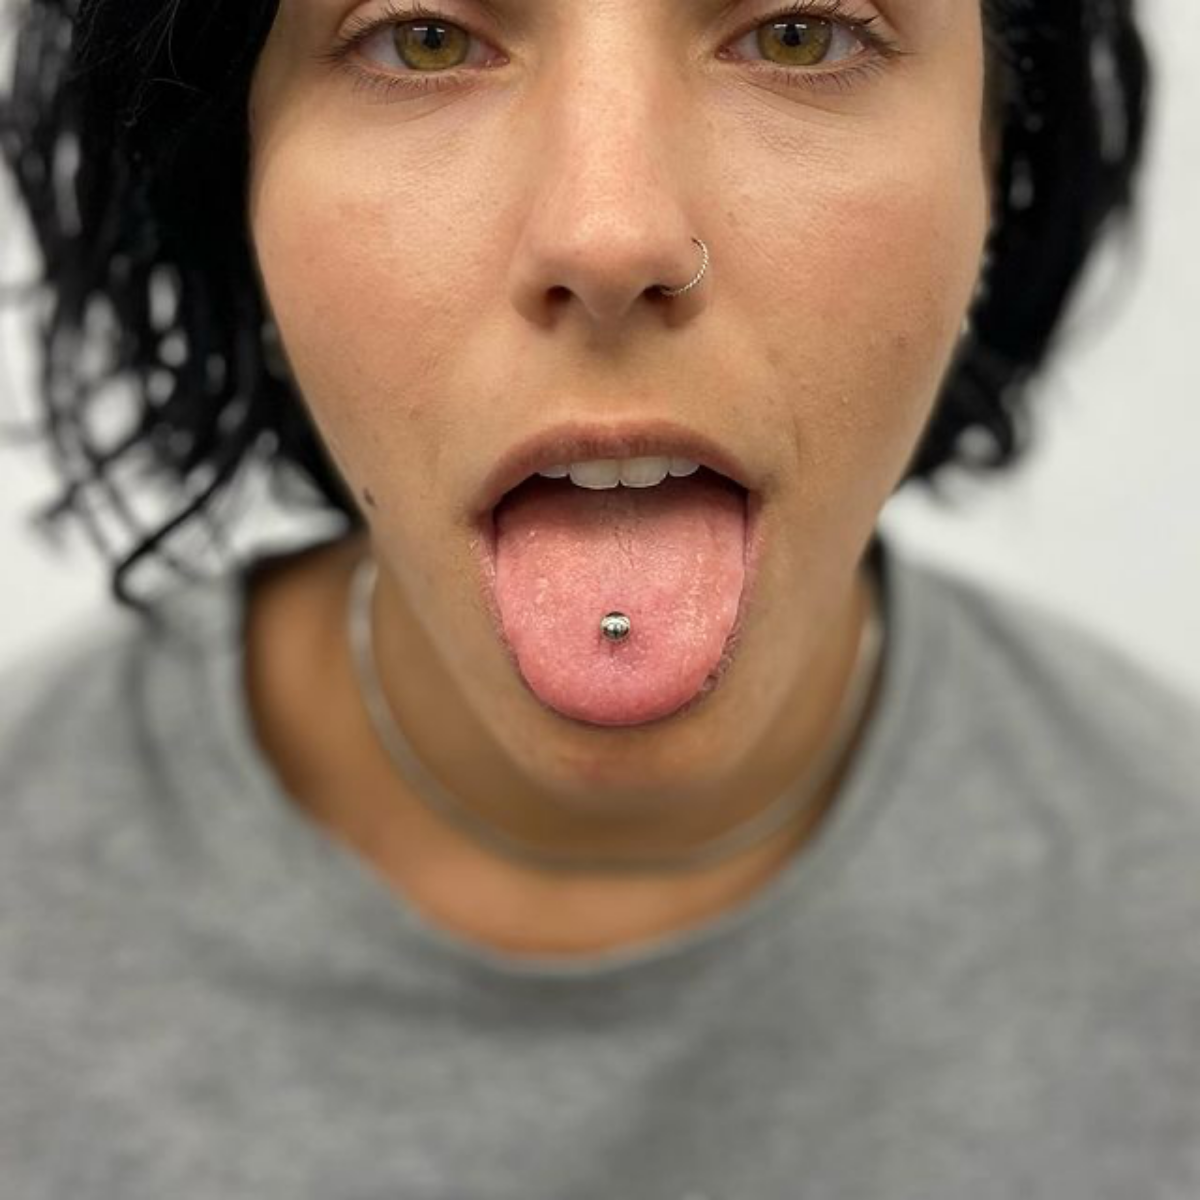 woman with pierced tongue